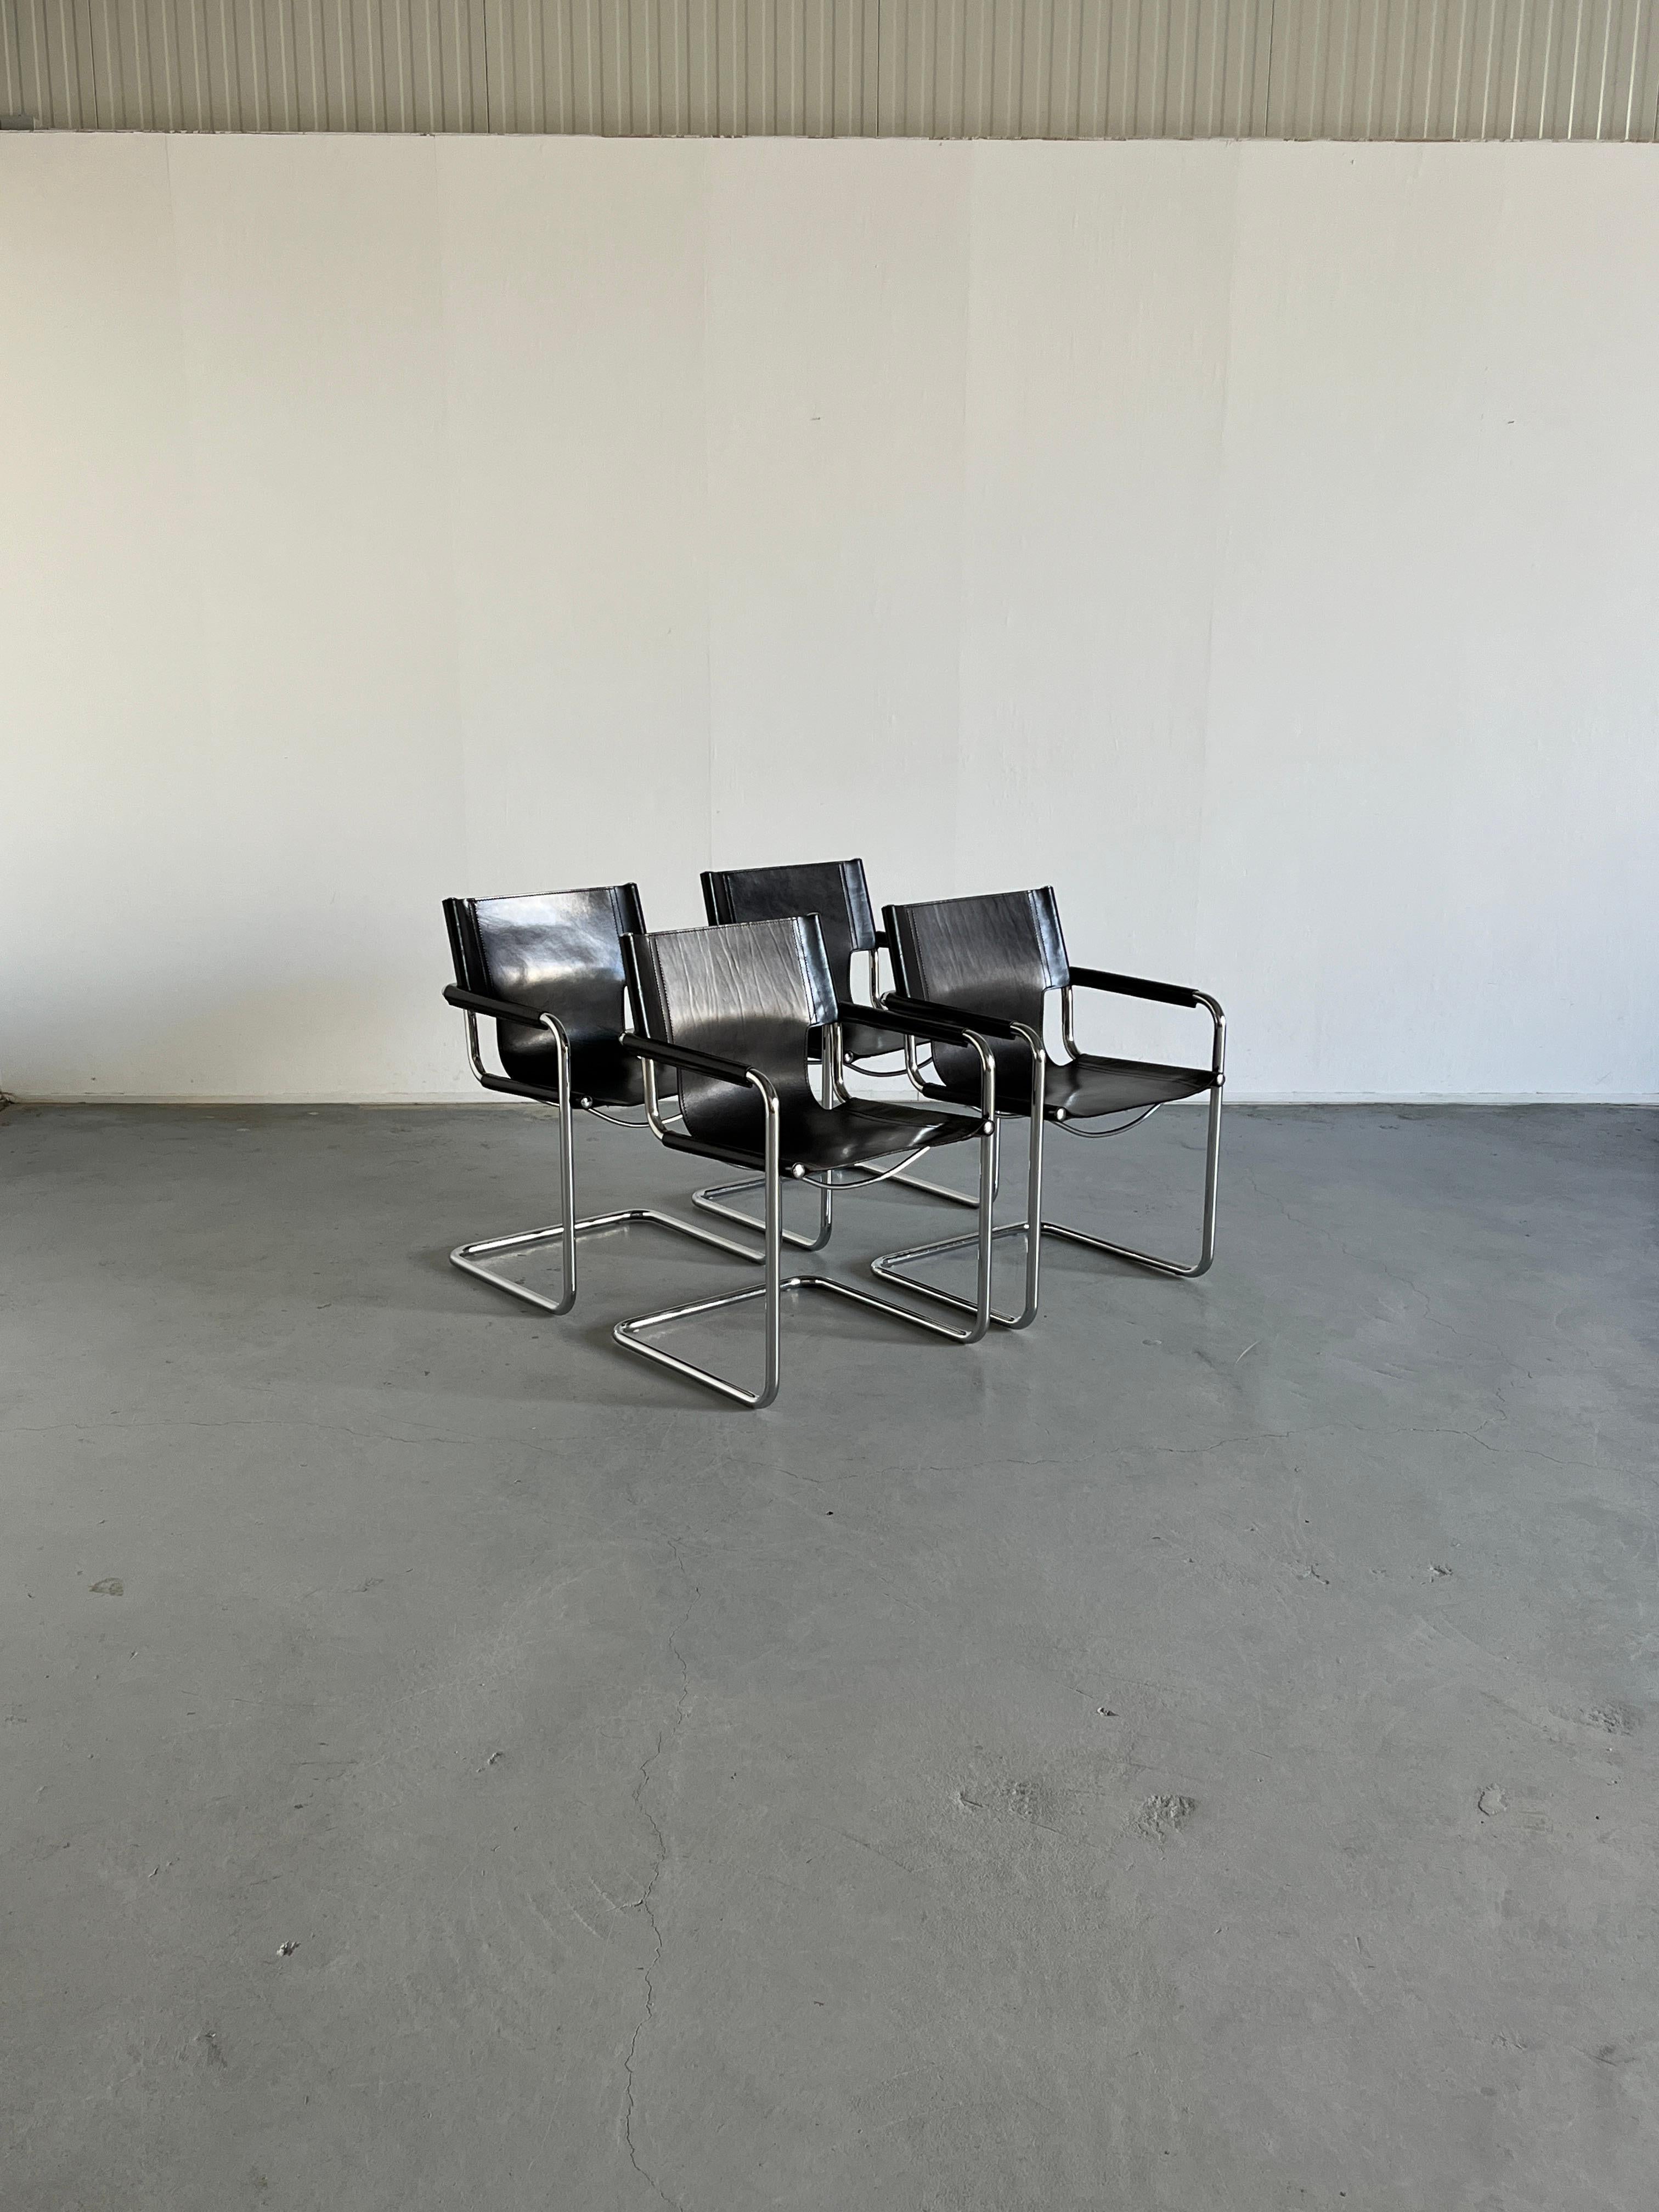 Four vintage Bauhaus design dark brown leather cantilever chairs, in style of Matteo Grassi or Fasem Madrid chairs based on the designs of Mart Stam.
Thick dark brown leather and chromed tubular steel construction.
High-quality Italian production of